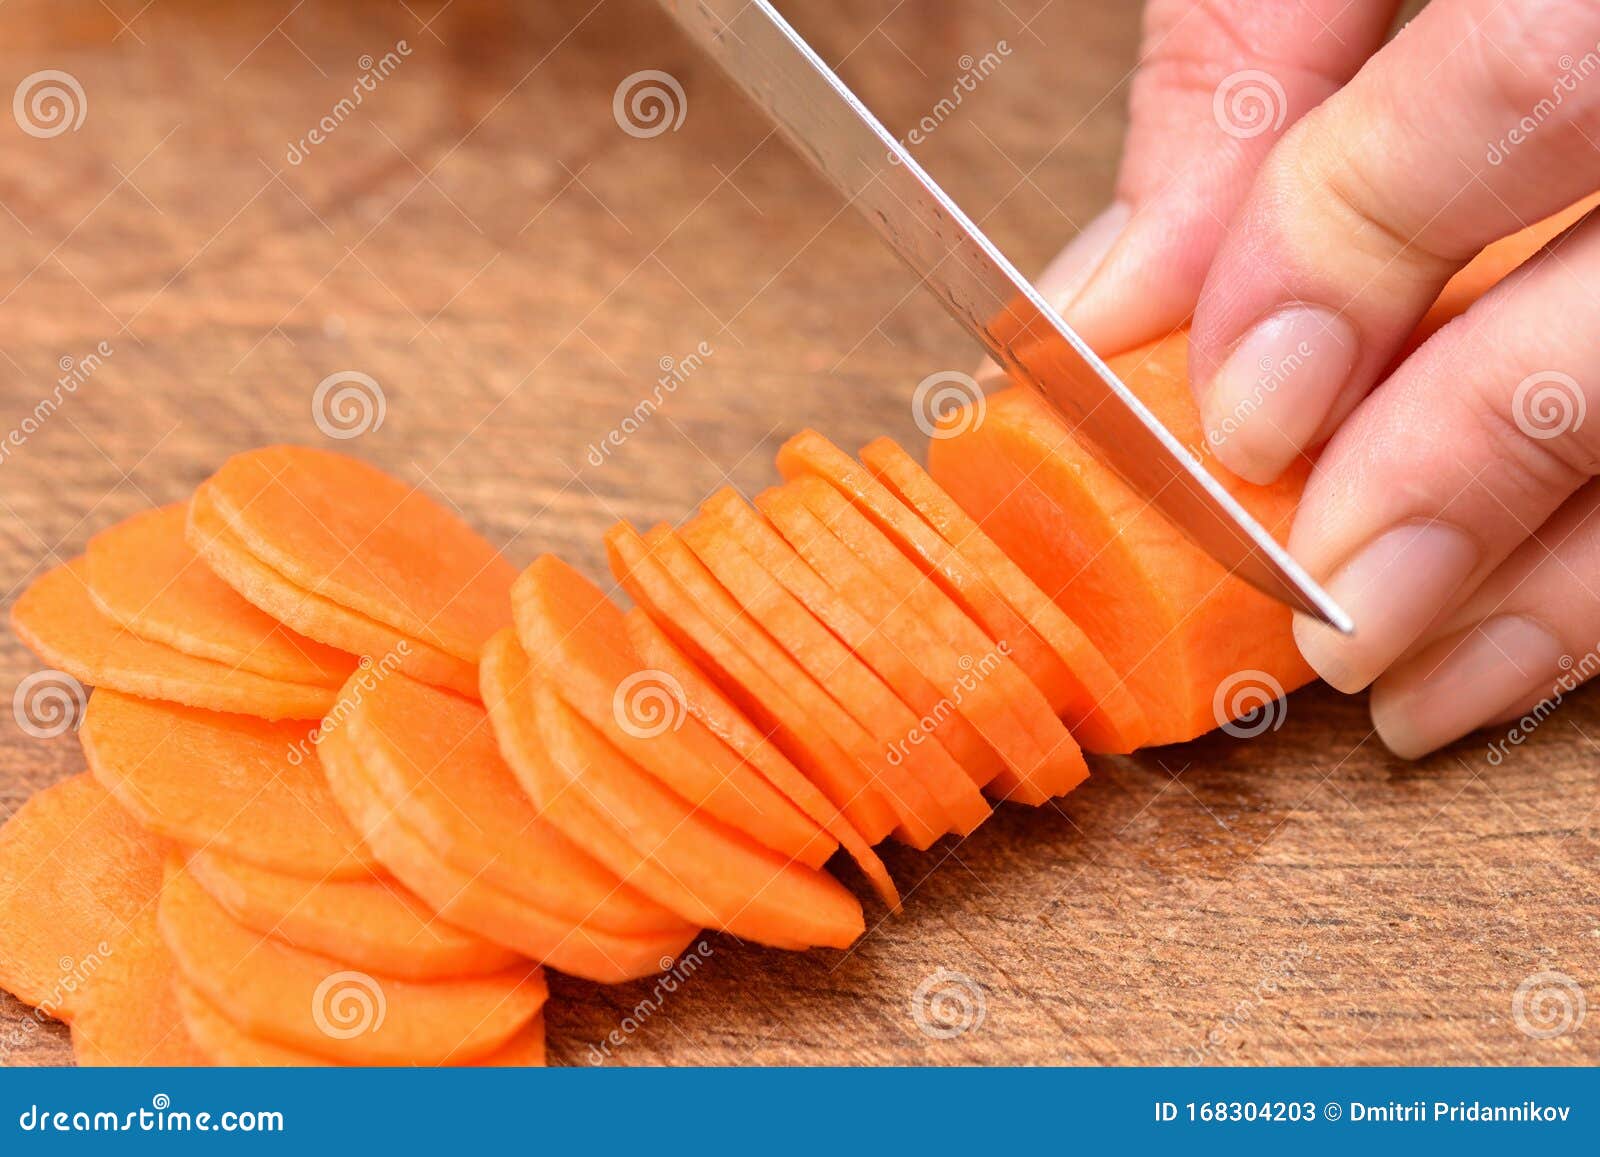 Carrot cutting skill stock photo. Image of cooking, dice - 172807914